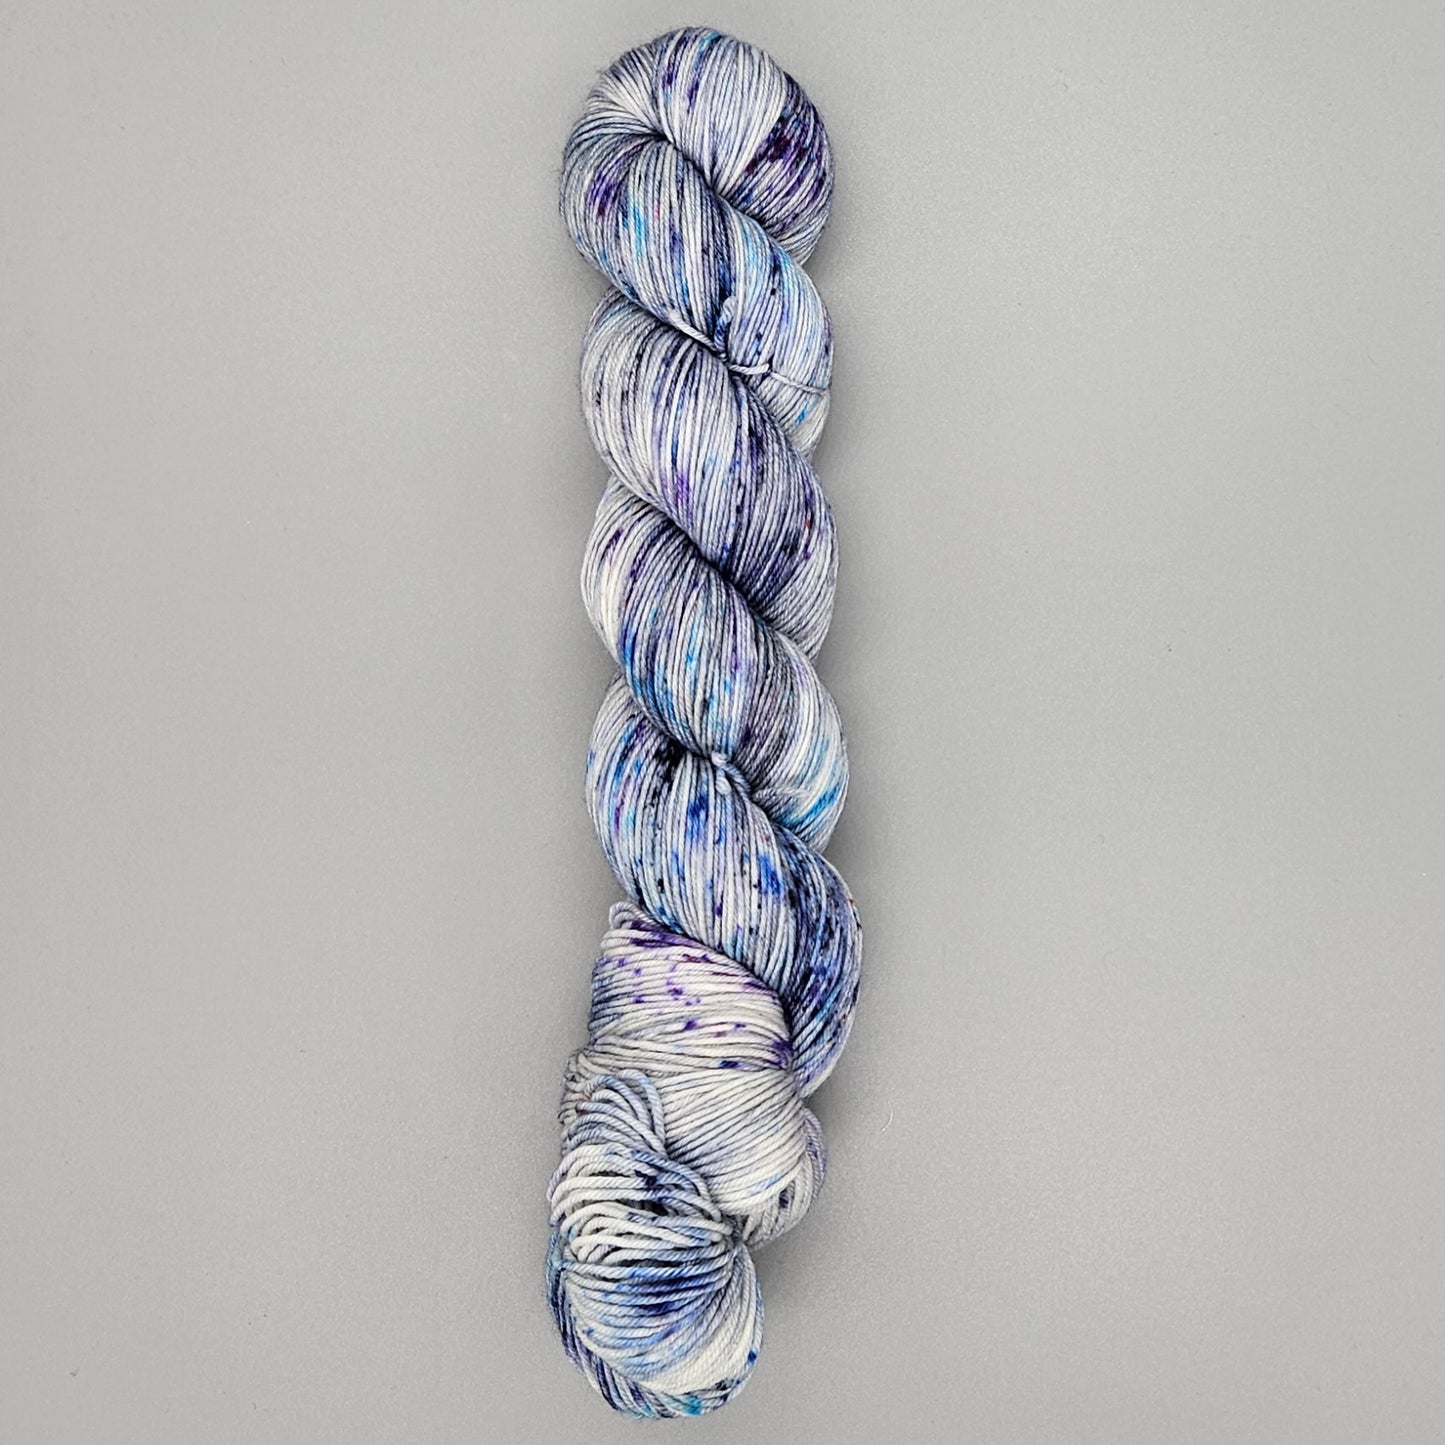 DYED TO ORDER - Agatha, This Is Magnus